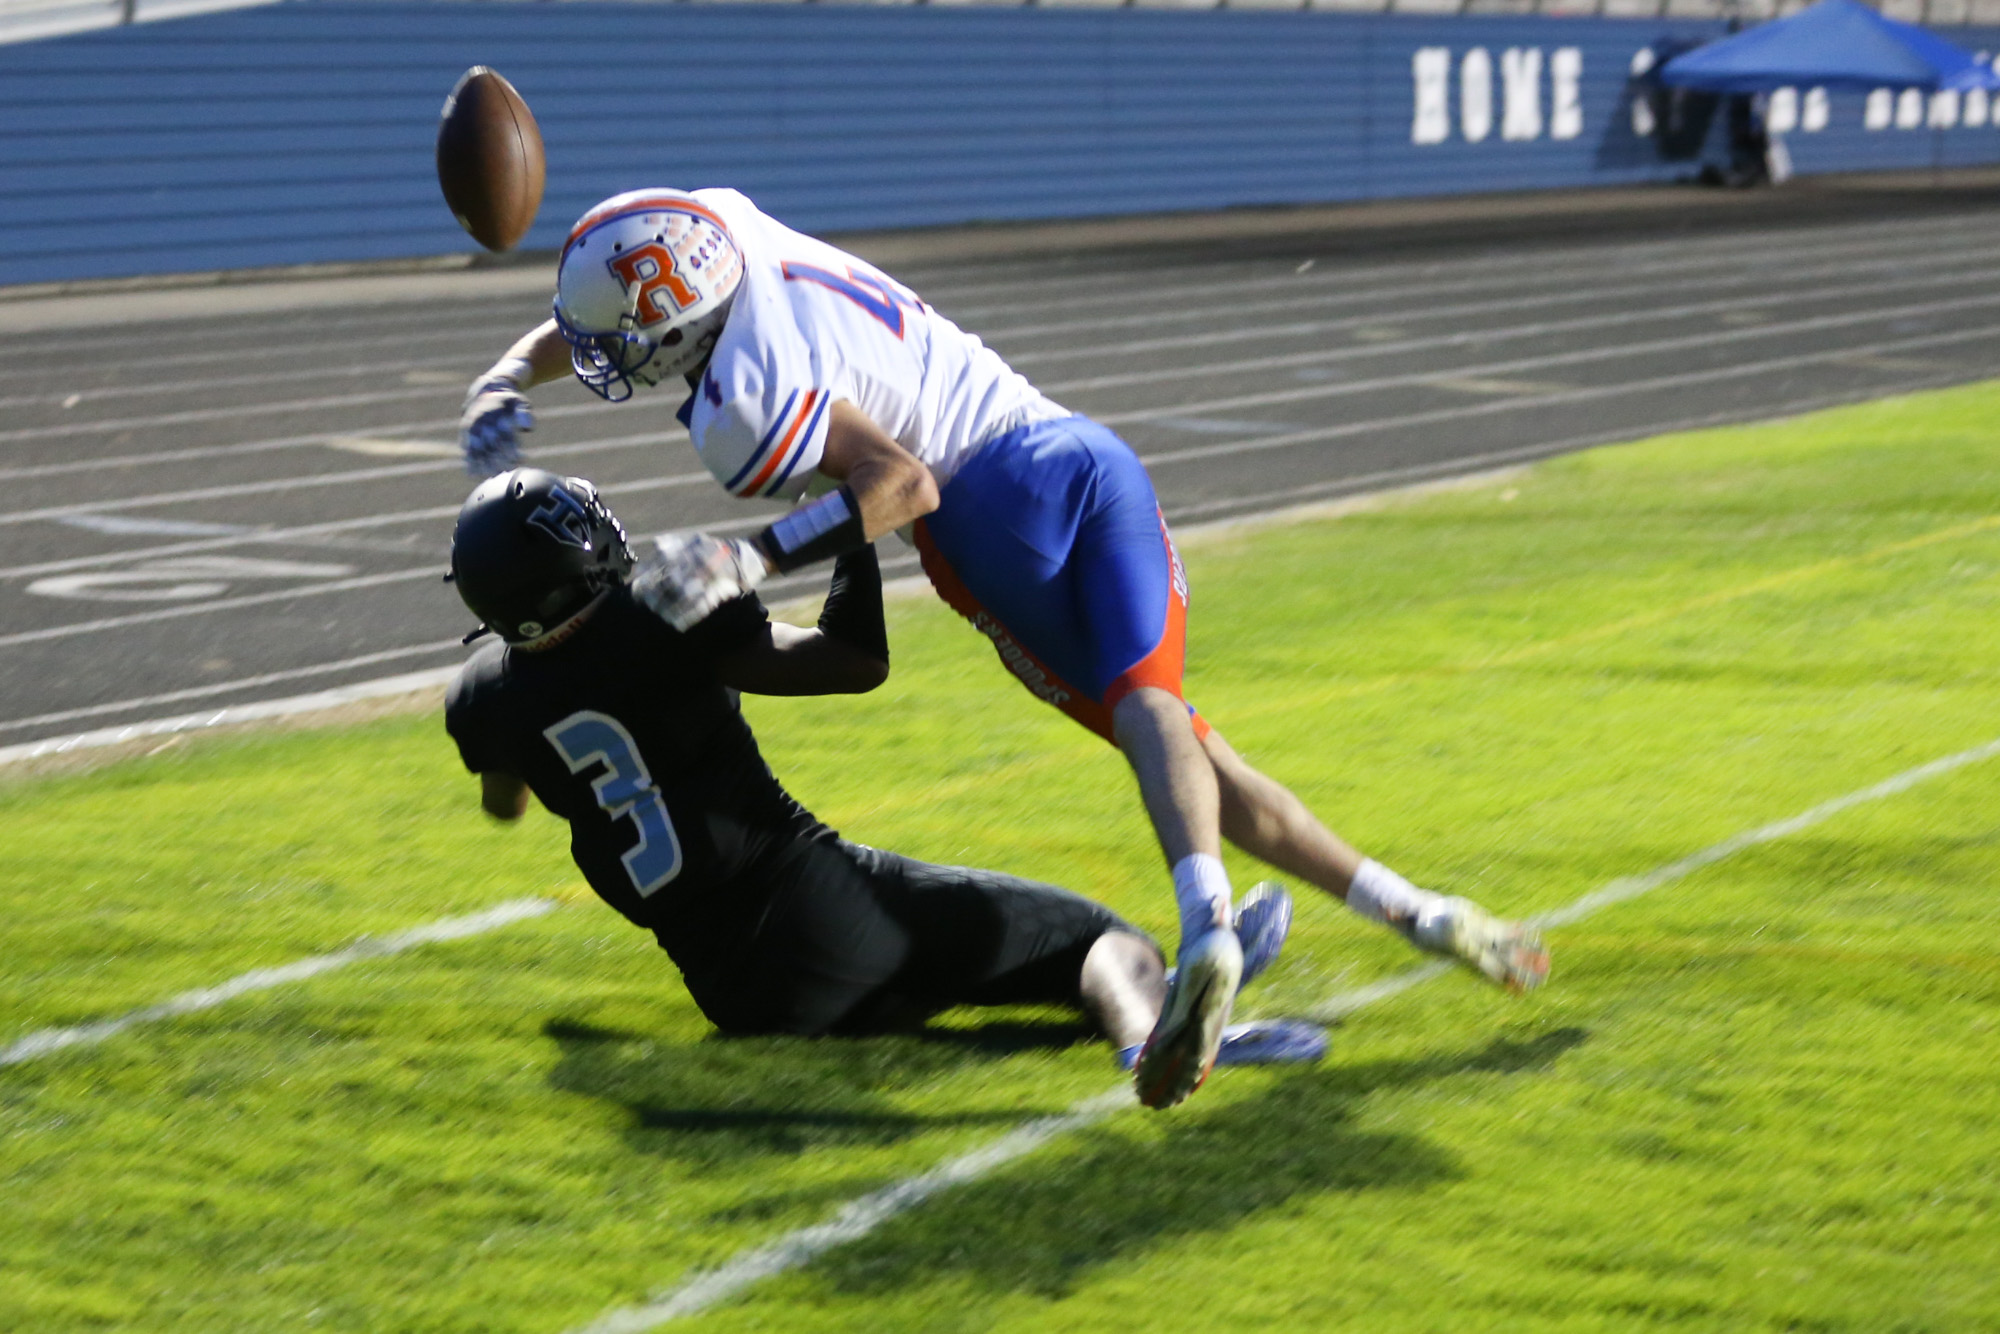 Ridgefield Spudders Ryan Jenkins (4) defends against a pass intended for Hockinson Hawks Kenyon Johnson (3) in first-half action in the 2A Greater St. Helens League season opener for both teams at Hockinson High School on Friday, Sept. 17, 2021. (Randy L.